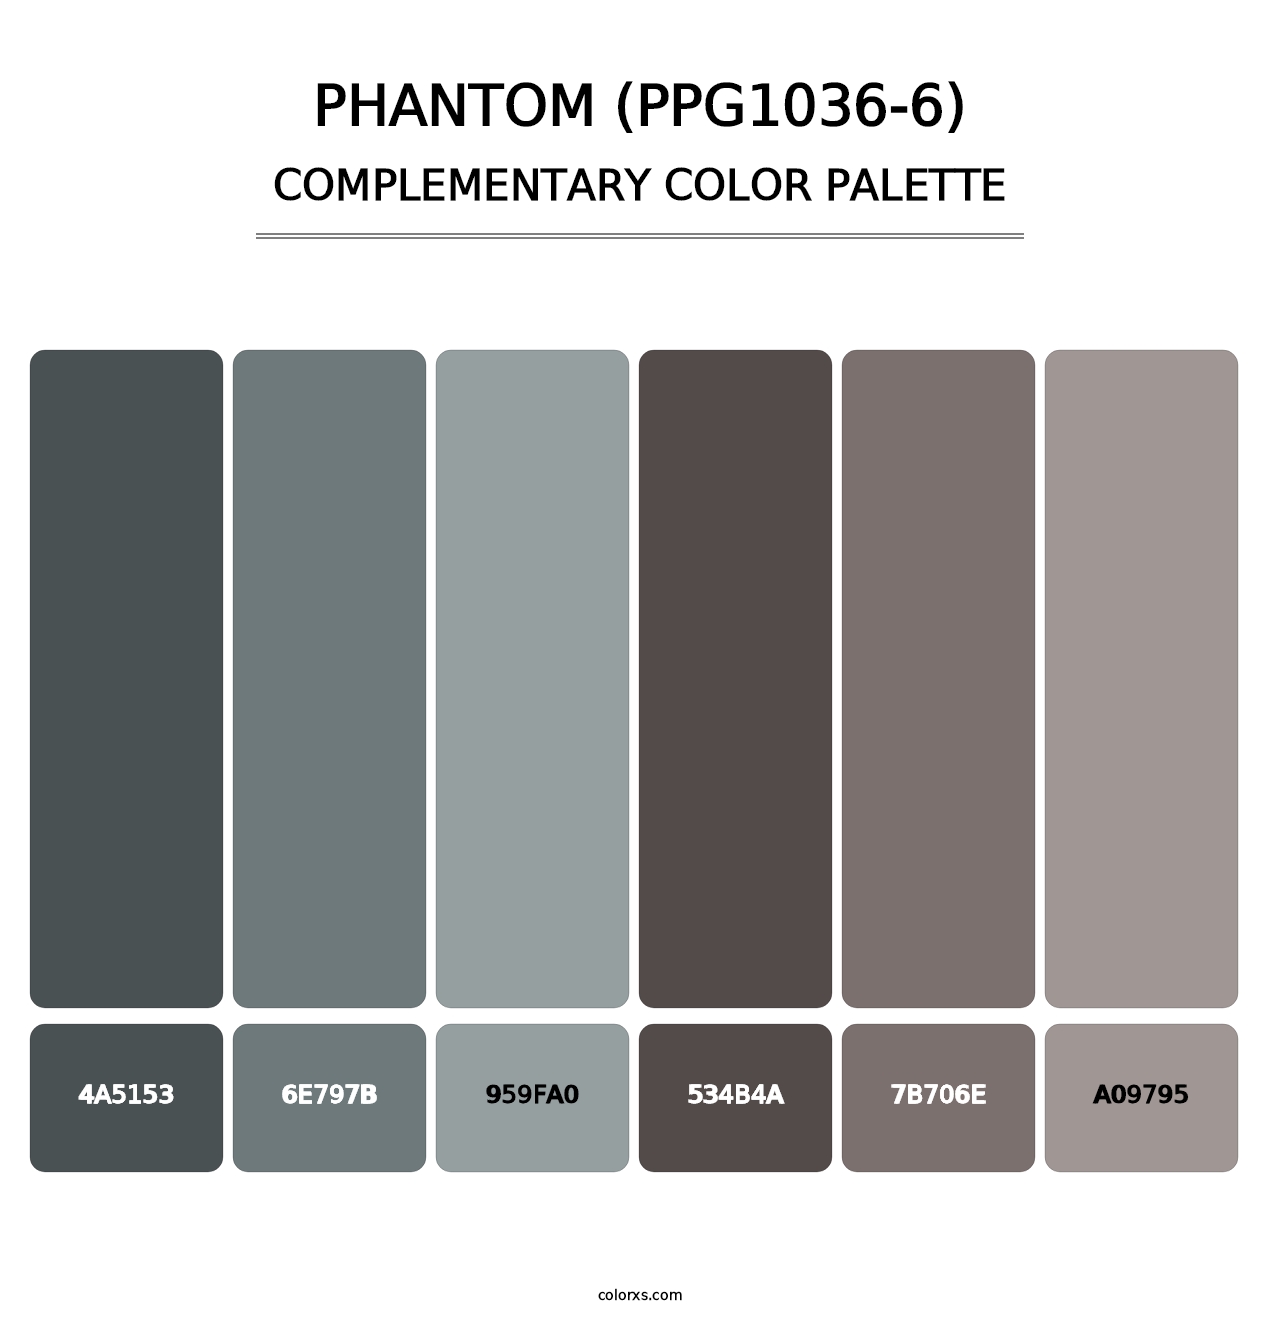 Phantom (PPG1036-6) - Complementary Color Palette